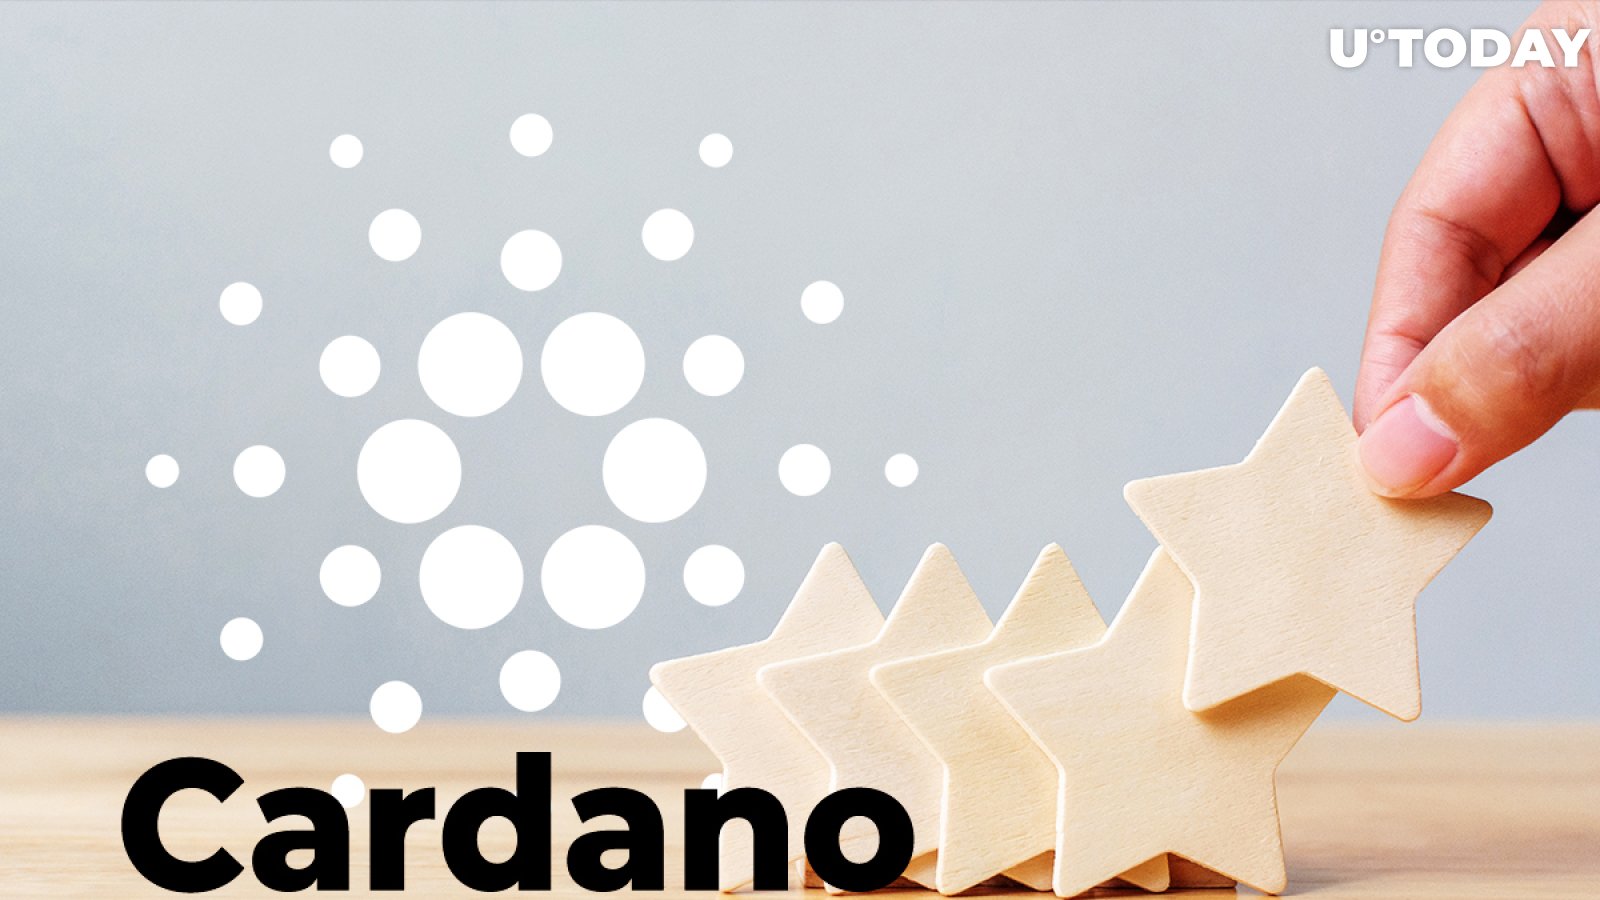 Cardano Score May Be Updated, Weiss Ratings Says, on the Following Terms